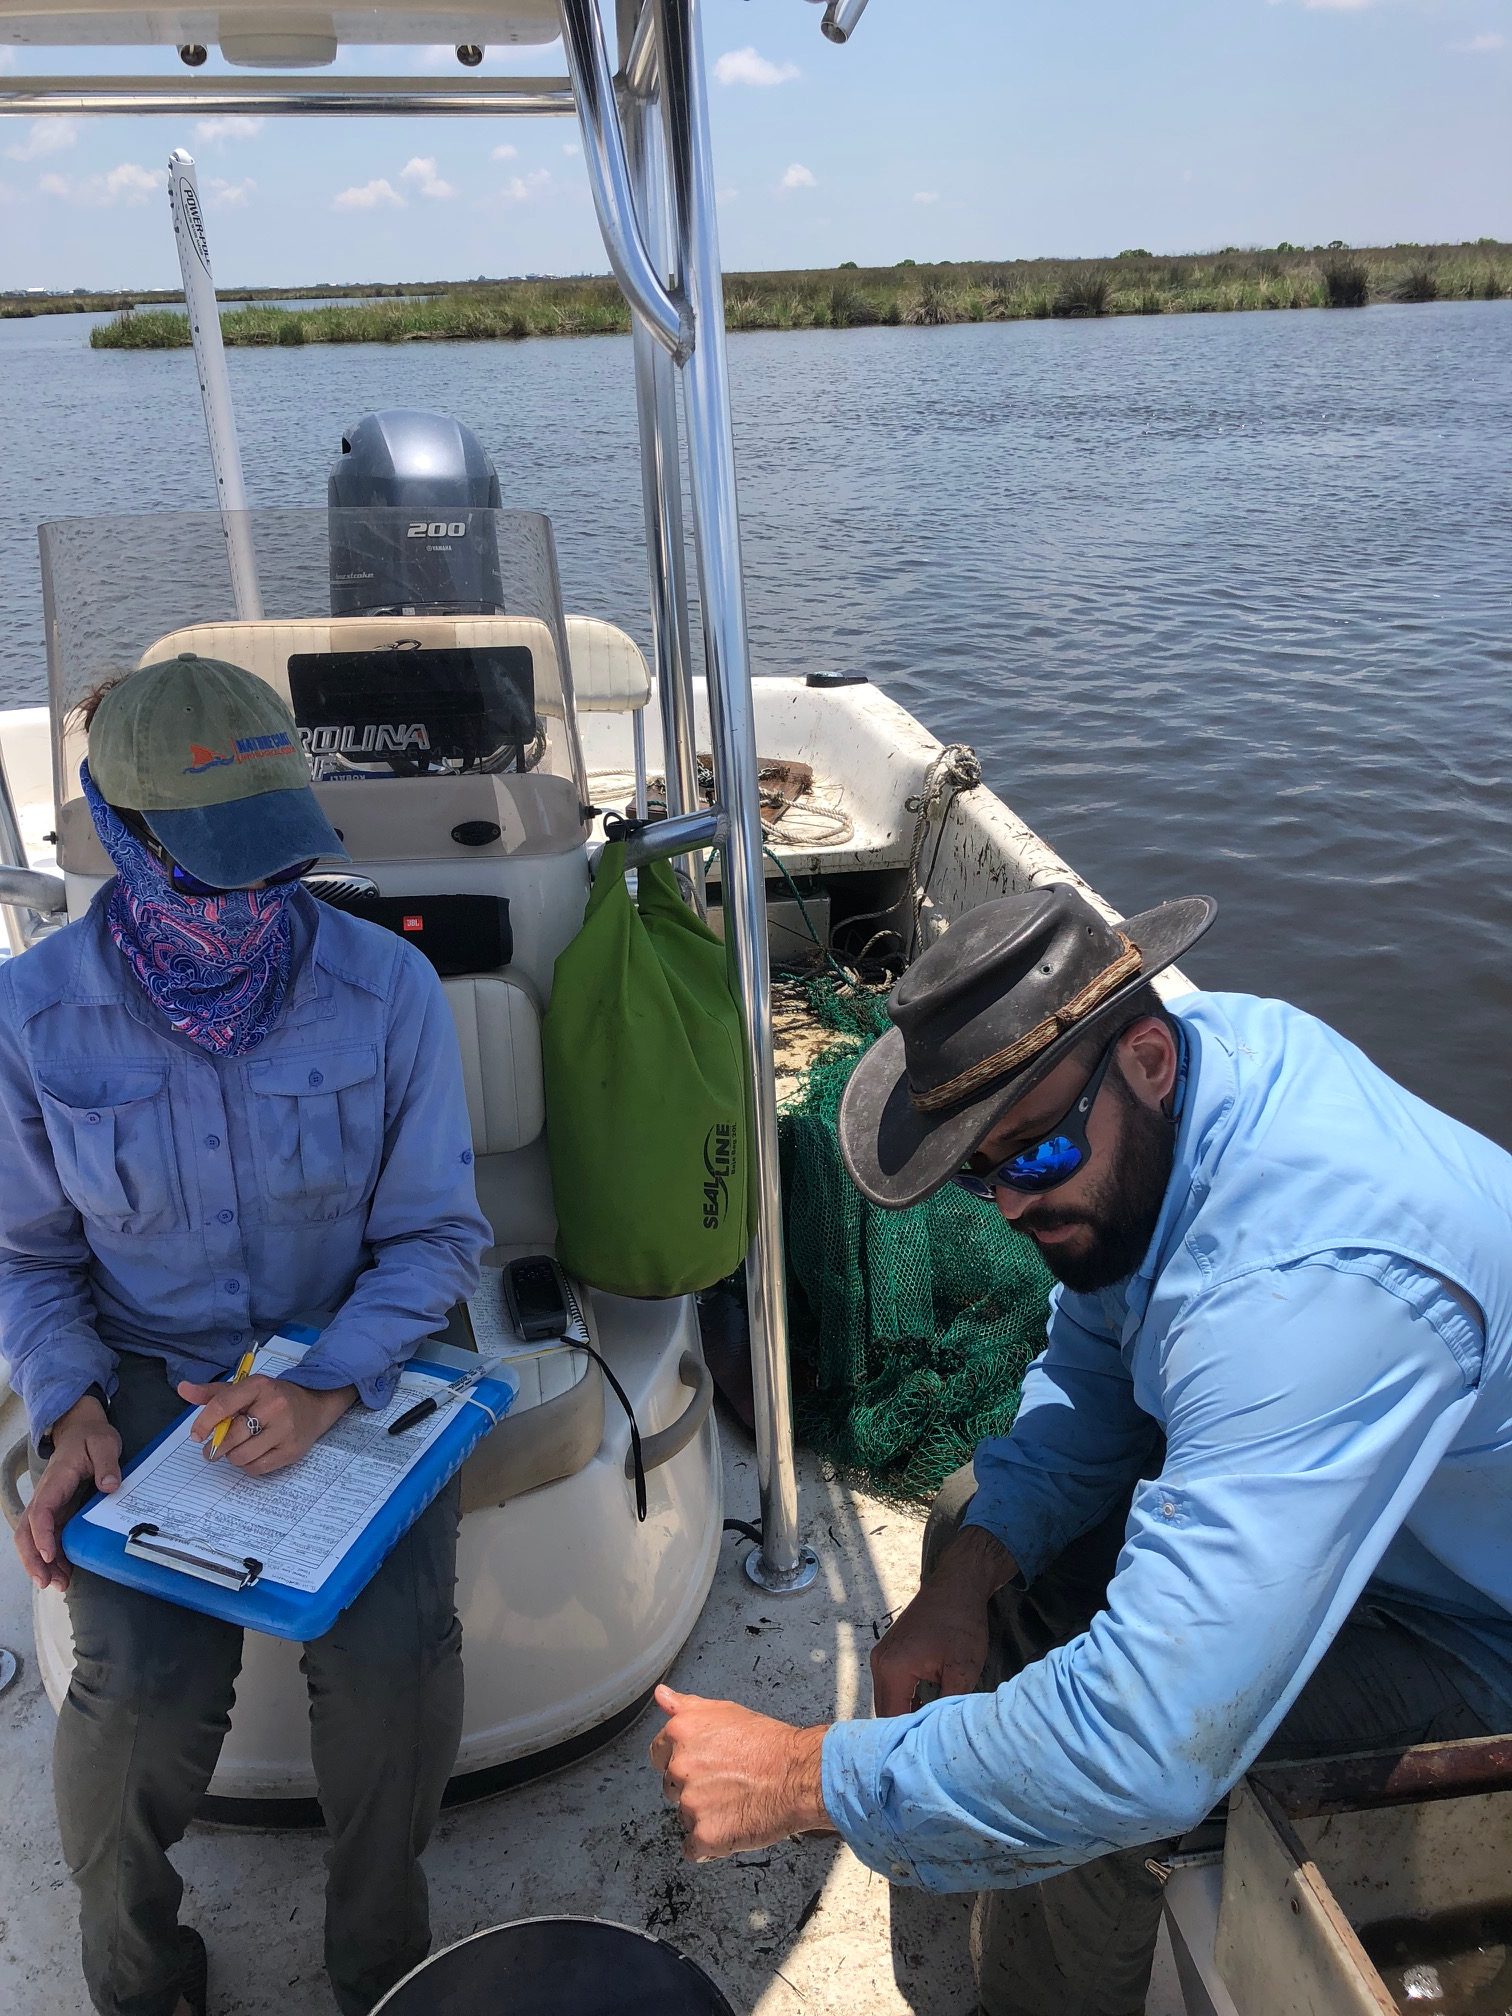 UF researchers take data of species abundance, length, and biomass on a recent sampling trip. Photo credit: C. Martin